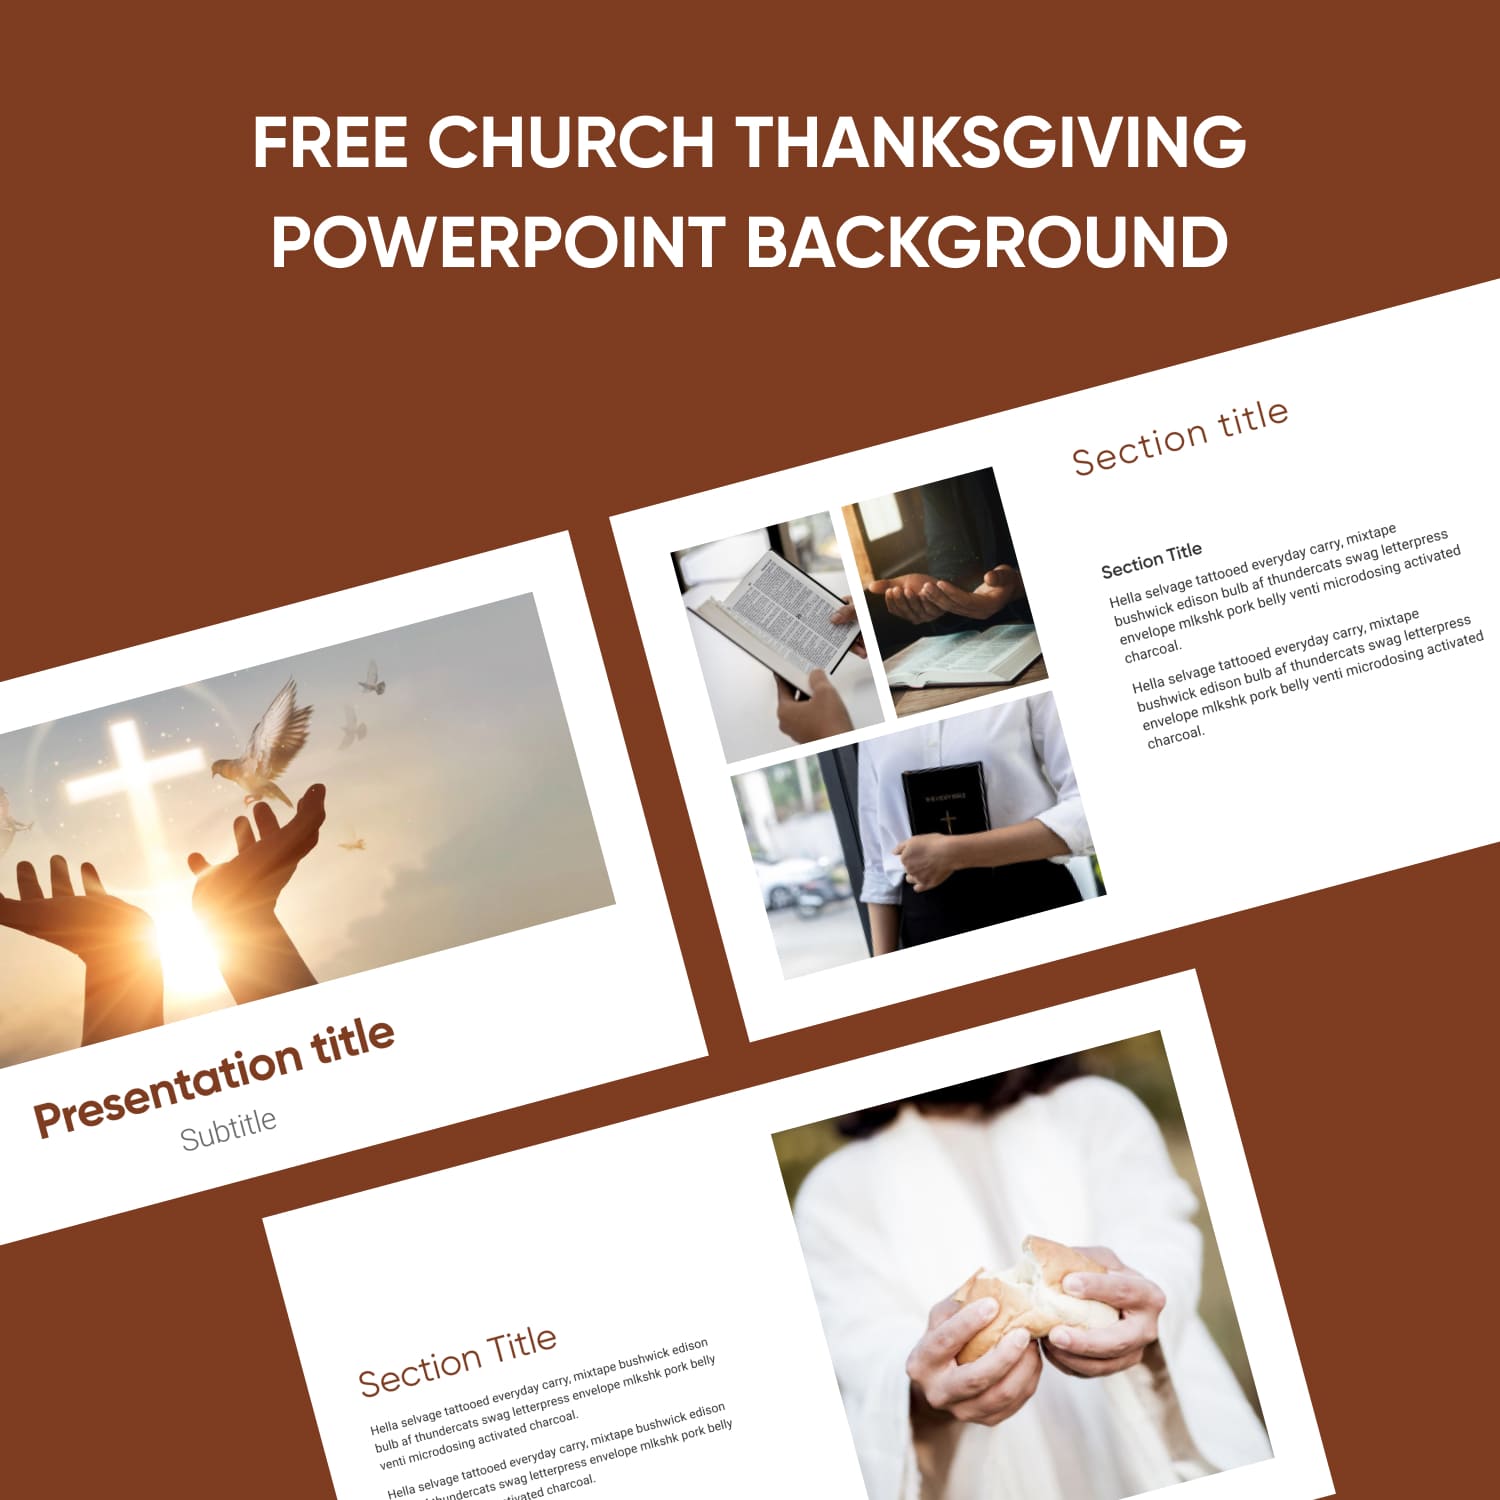 11 Preview Free Church Thanksgiving Powerpoint Background1500x1500 1.